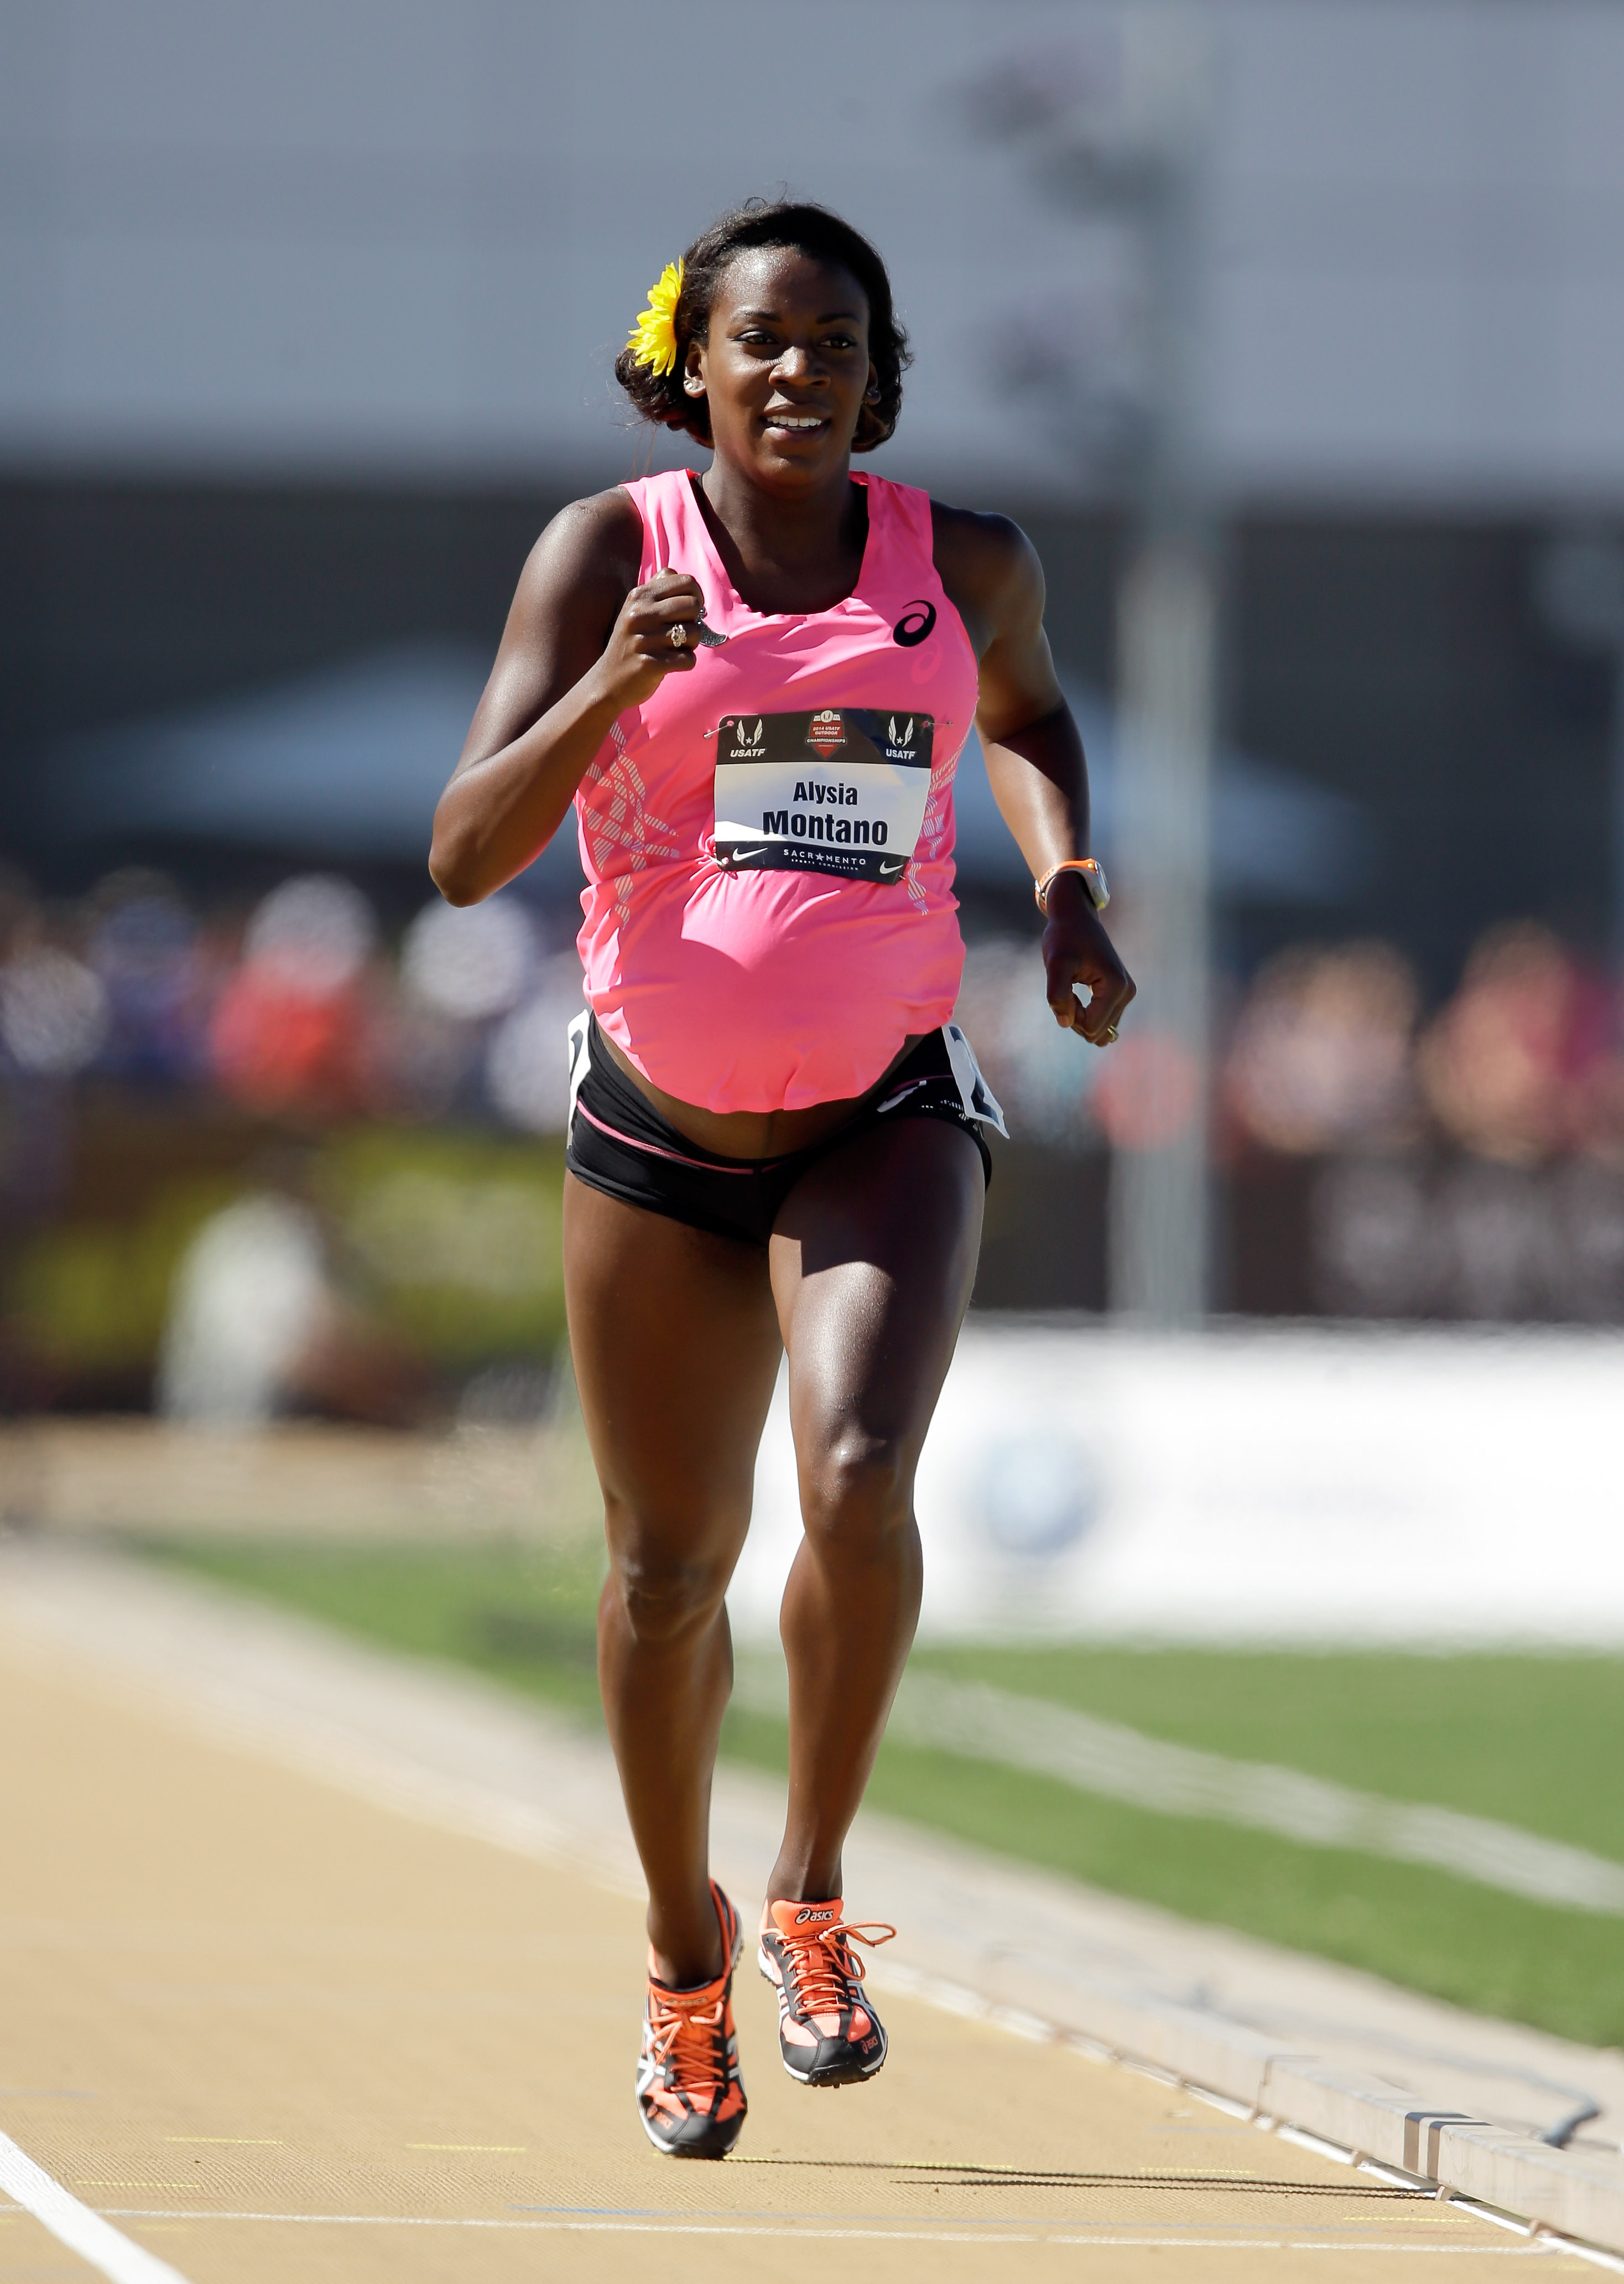 A pregnant Alysia Montano runs in the opening round of the women's 800 meter run during day 2 of the USATF Outdoor Championships at Hornet Stadium in Sacramento, California on on June 26, 2014. (Ezra Shaw—Getty Images)